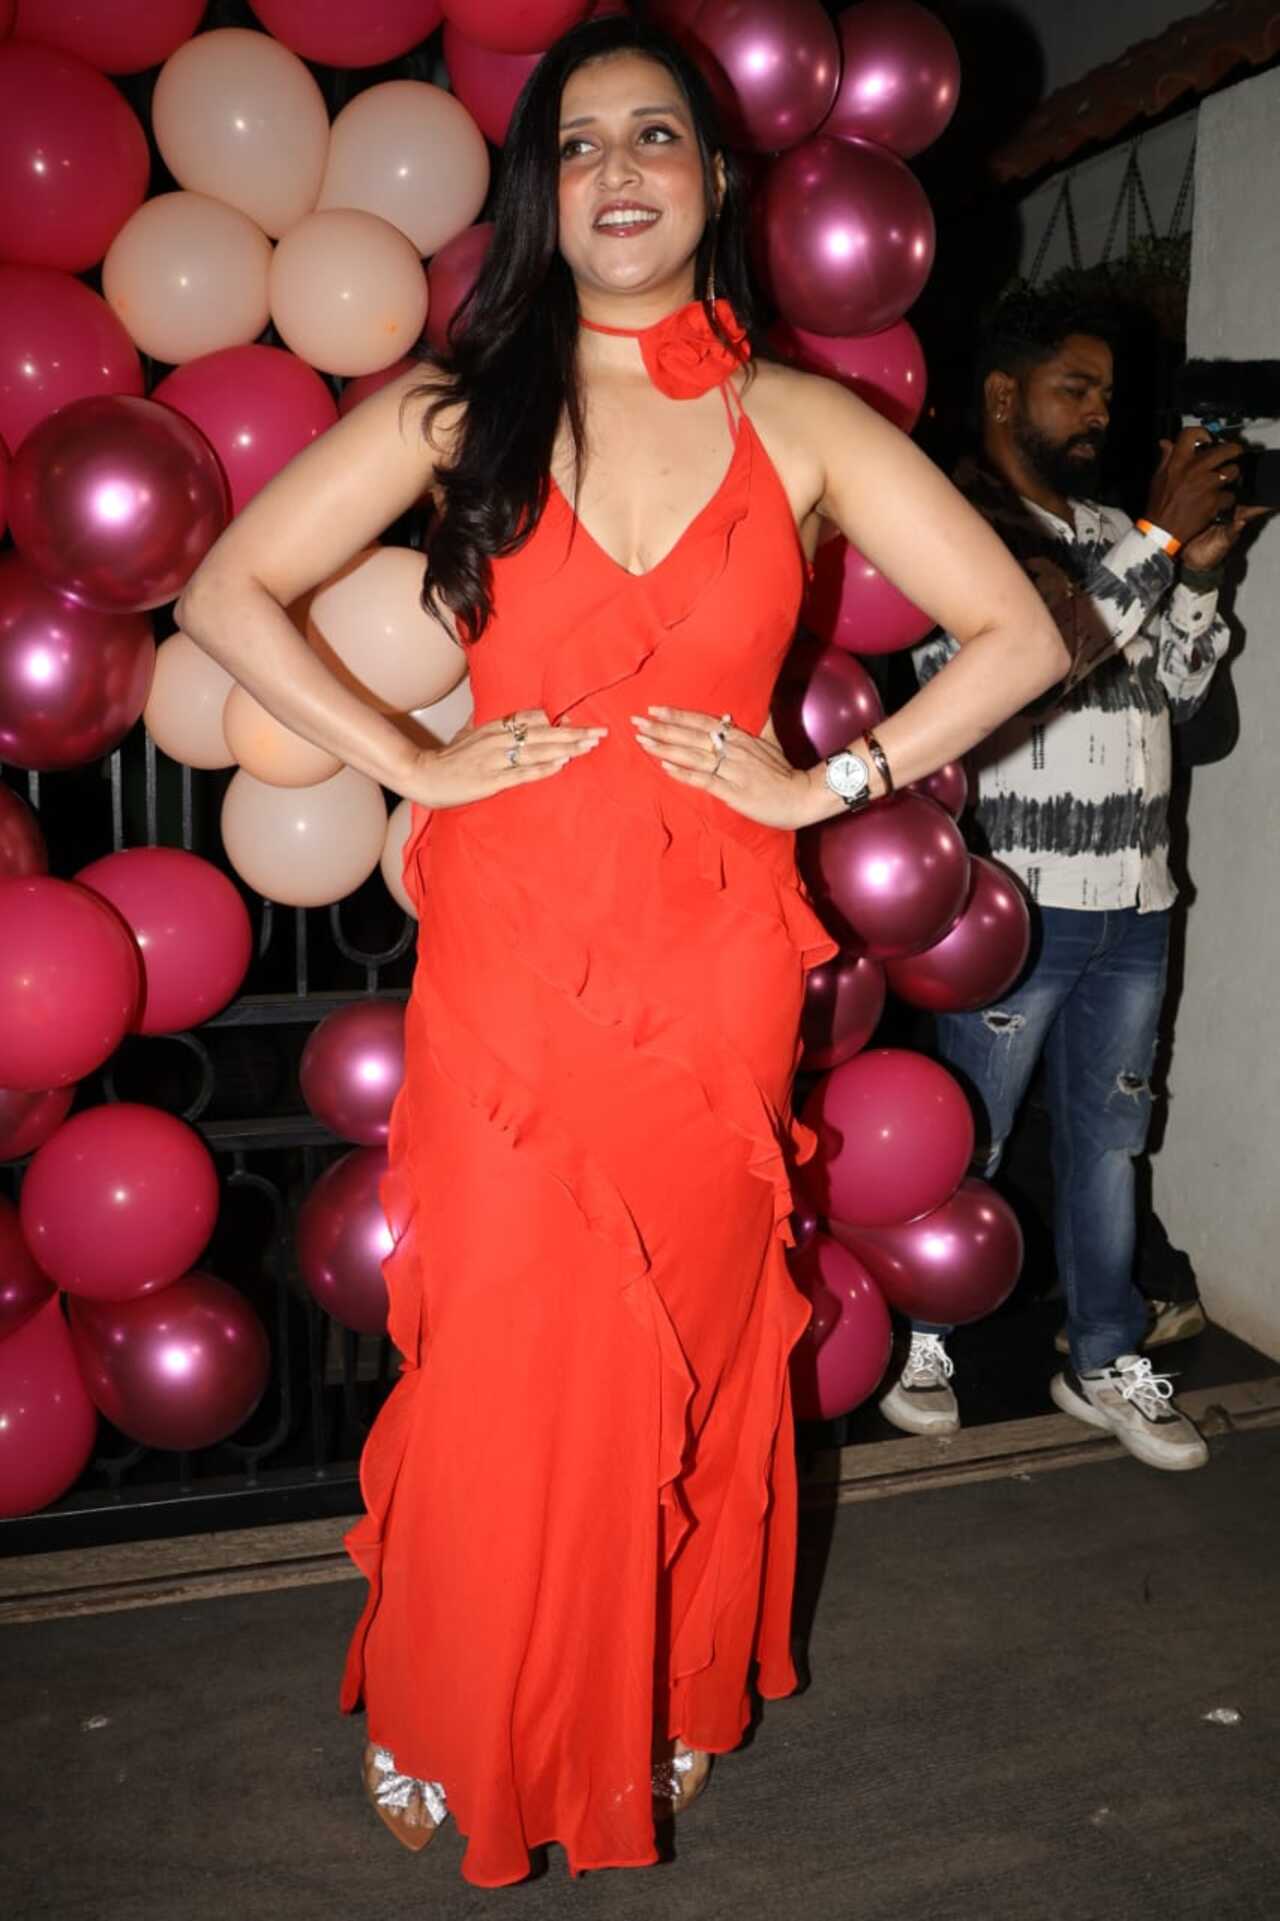 The former Bigg Boss contestant was seen in a stunning red dress for her party